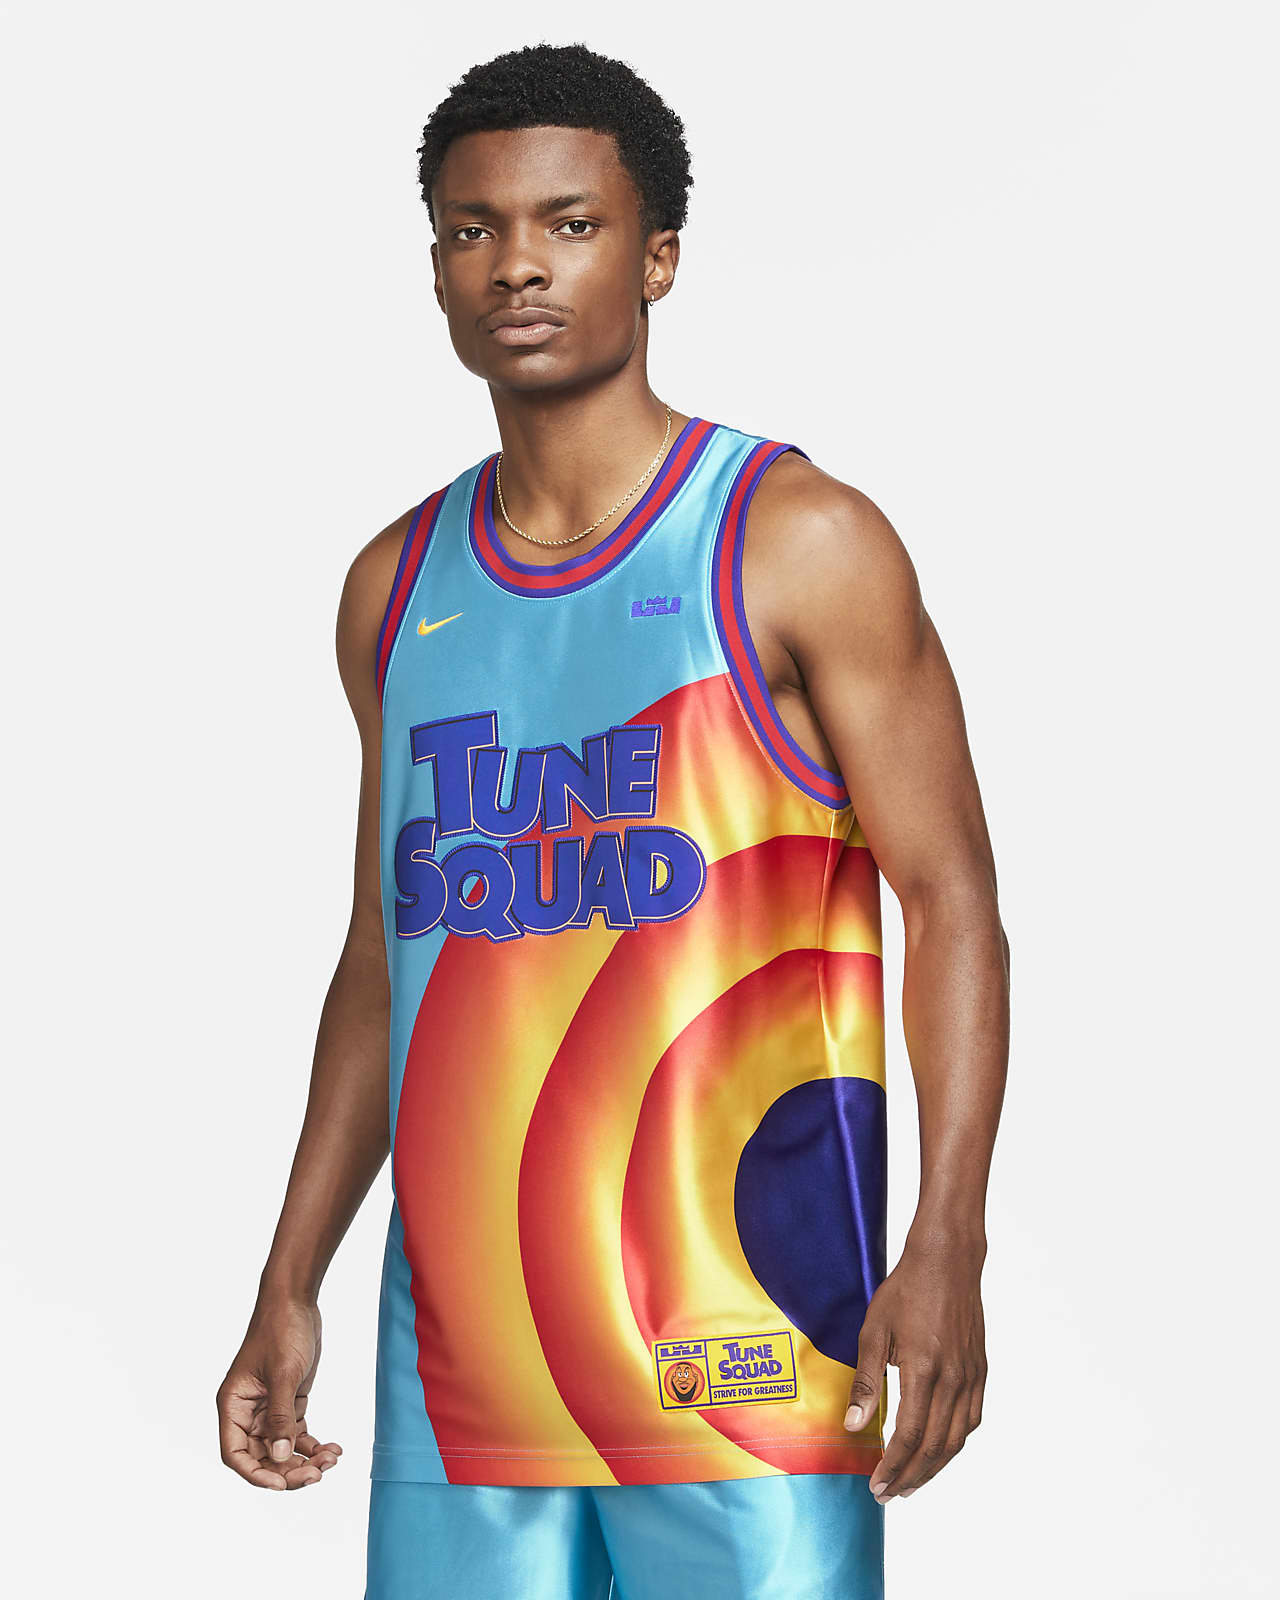 Jersey Nike Dri-FIT hombre x Space Jam: A New Legacy "Tune Squad". Nike.com